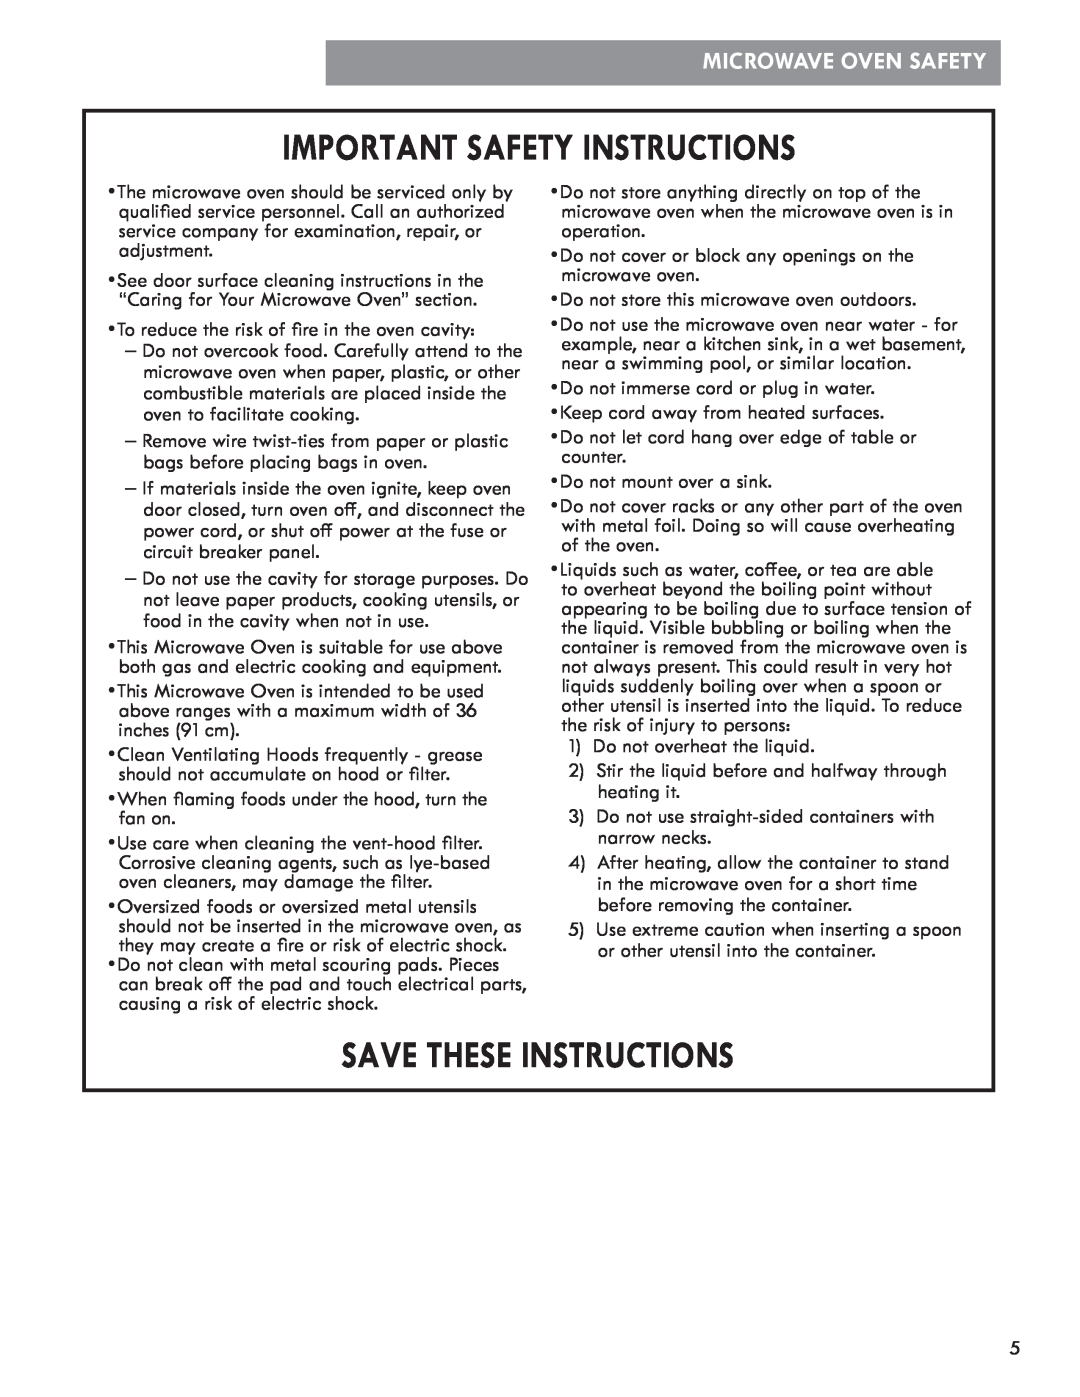 Kenmore 721.8502 manual Microwave Oven Safety, Important Safety Instructions, Save These Instructions 